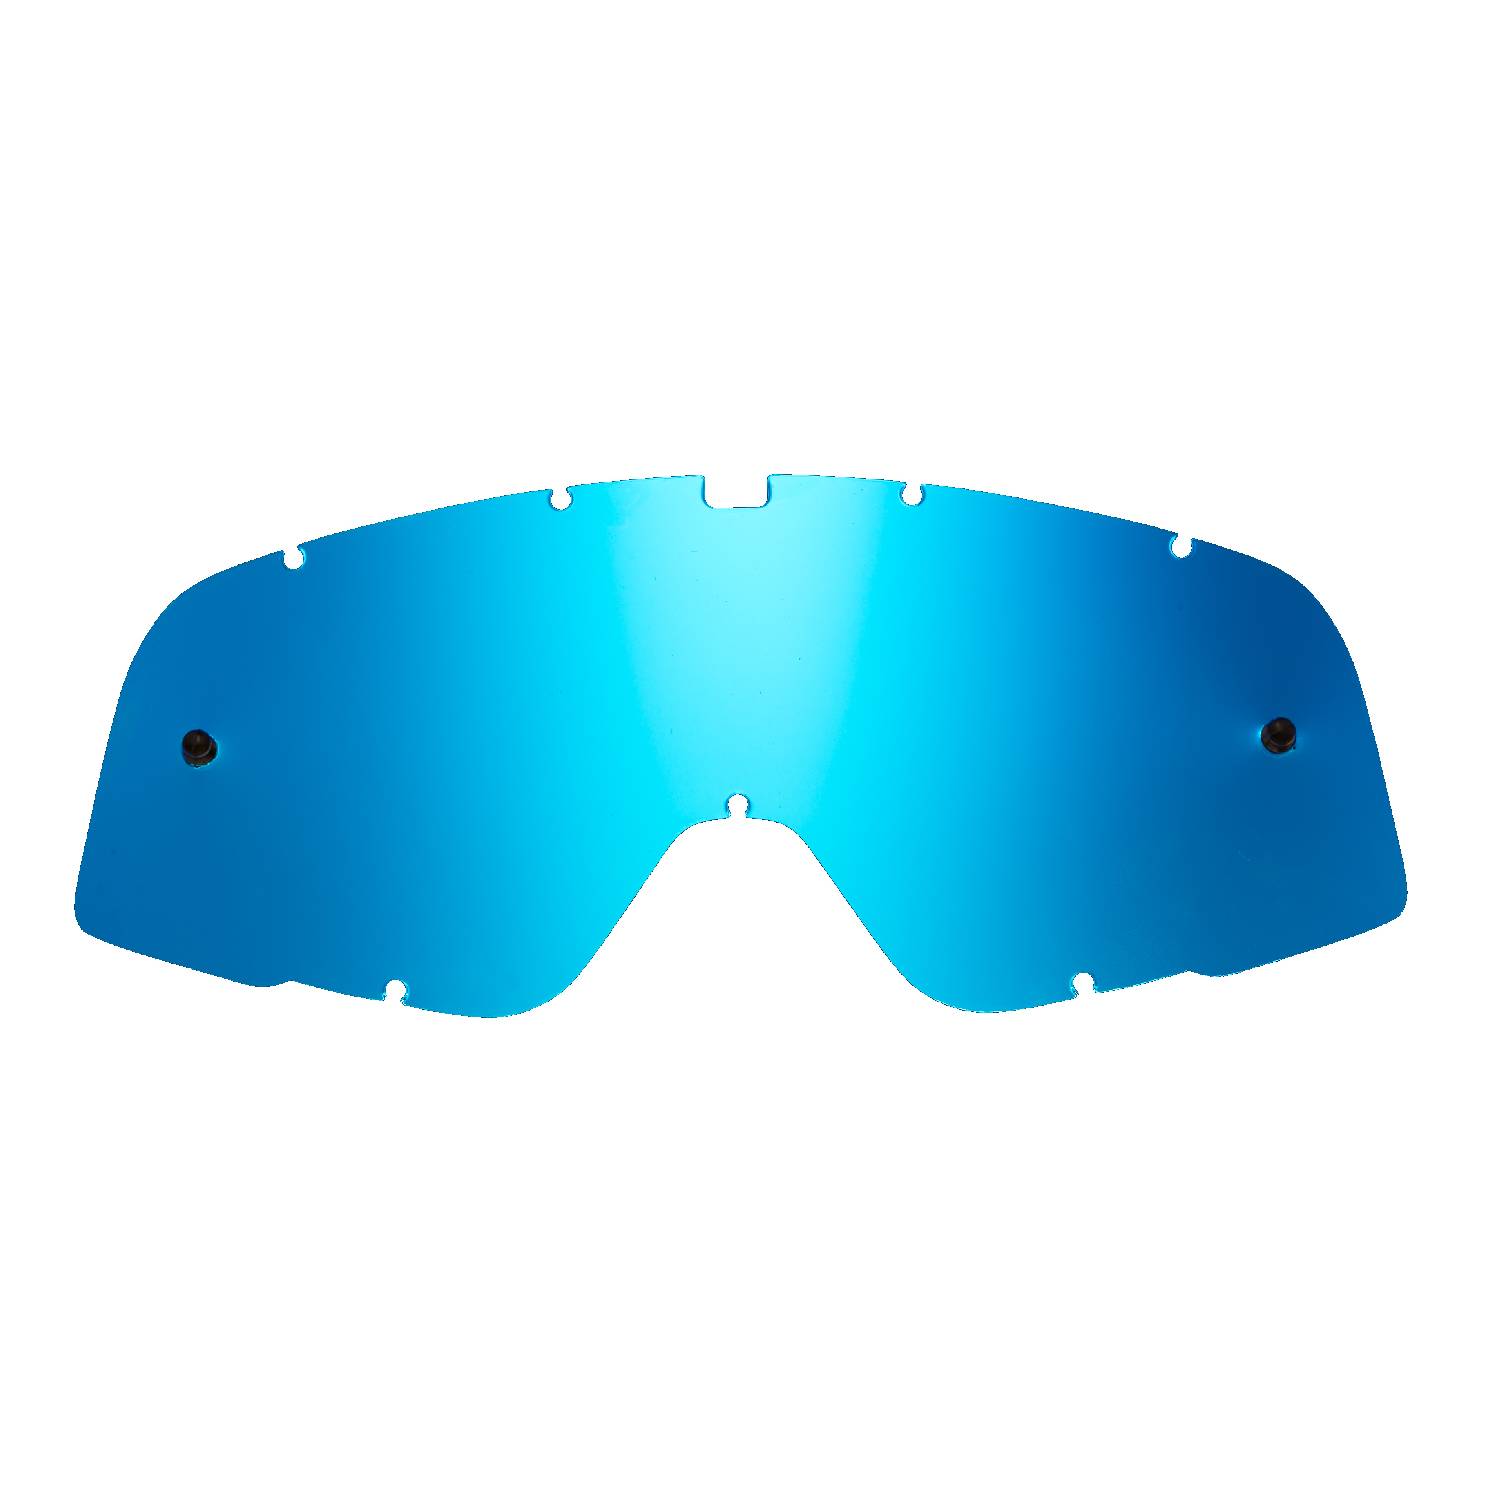 blue-toned mirrored replacement lenses for goggles compatible for 100% Barstow goggle